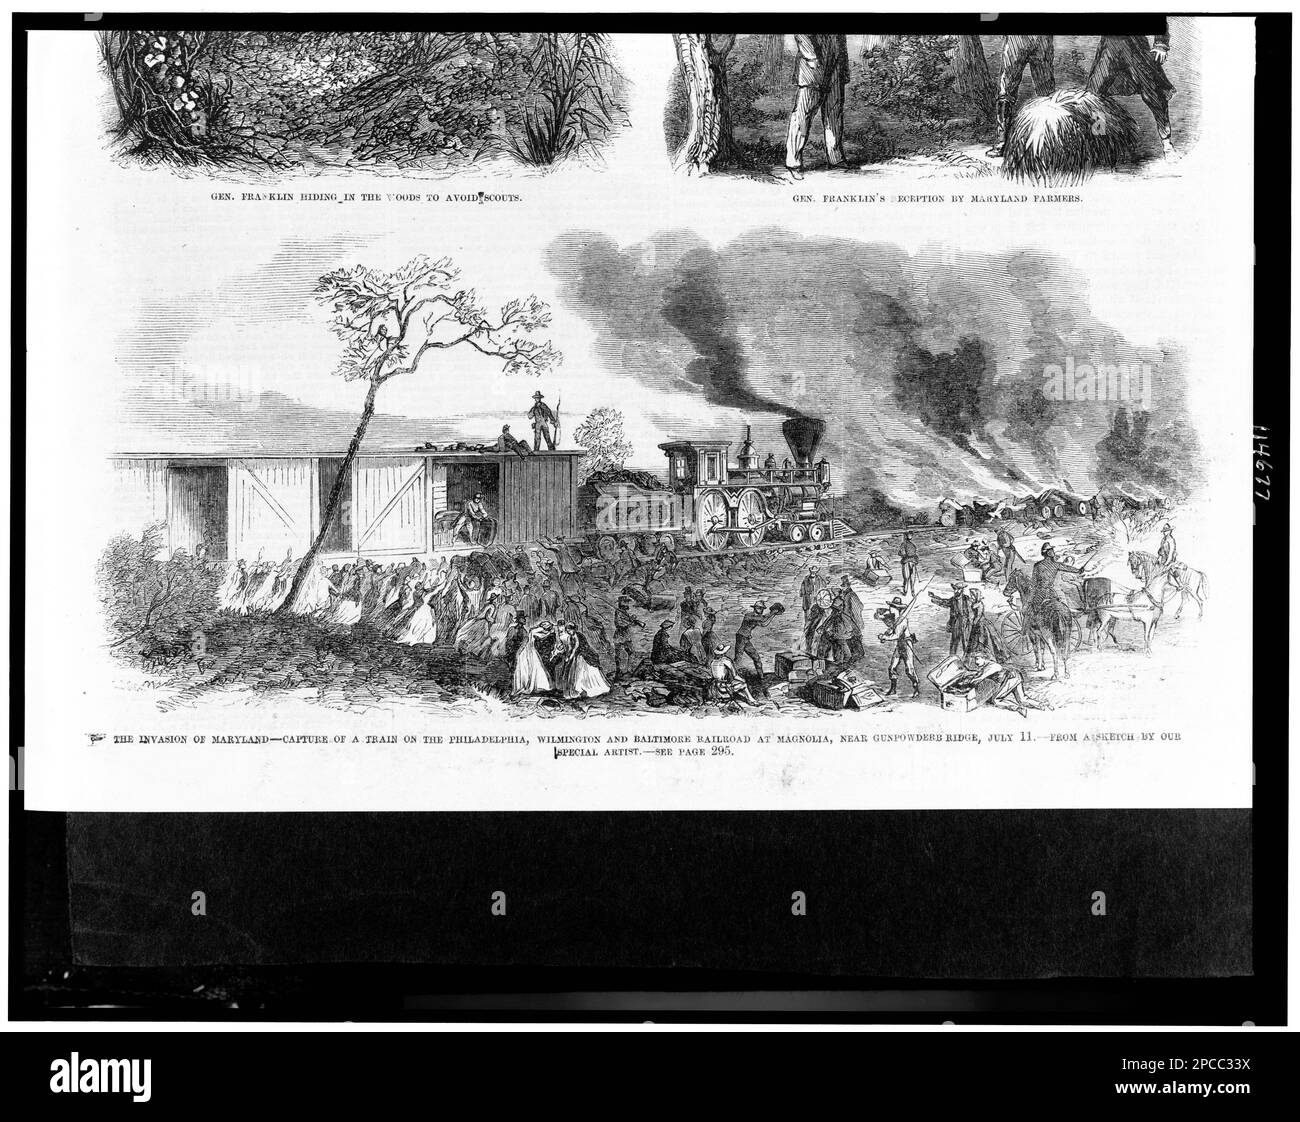 The invasion of Maryland--capture of a train on the Philadelphia, Wilmington and Baltimore Railroad at Magnolia, near Gunpowderb sic Ridge, July 11 / from a sketch by our special artist.. Illus. in: Frank Leslie's illustrated newspaper, 1864 July 30, p. 289. United States, History, Civil War, 1861-1865, Campaigns & battles, Railroads, Maryland, 1860-1870. Stock Photo